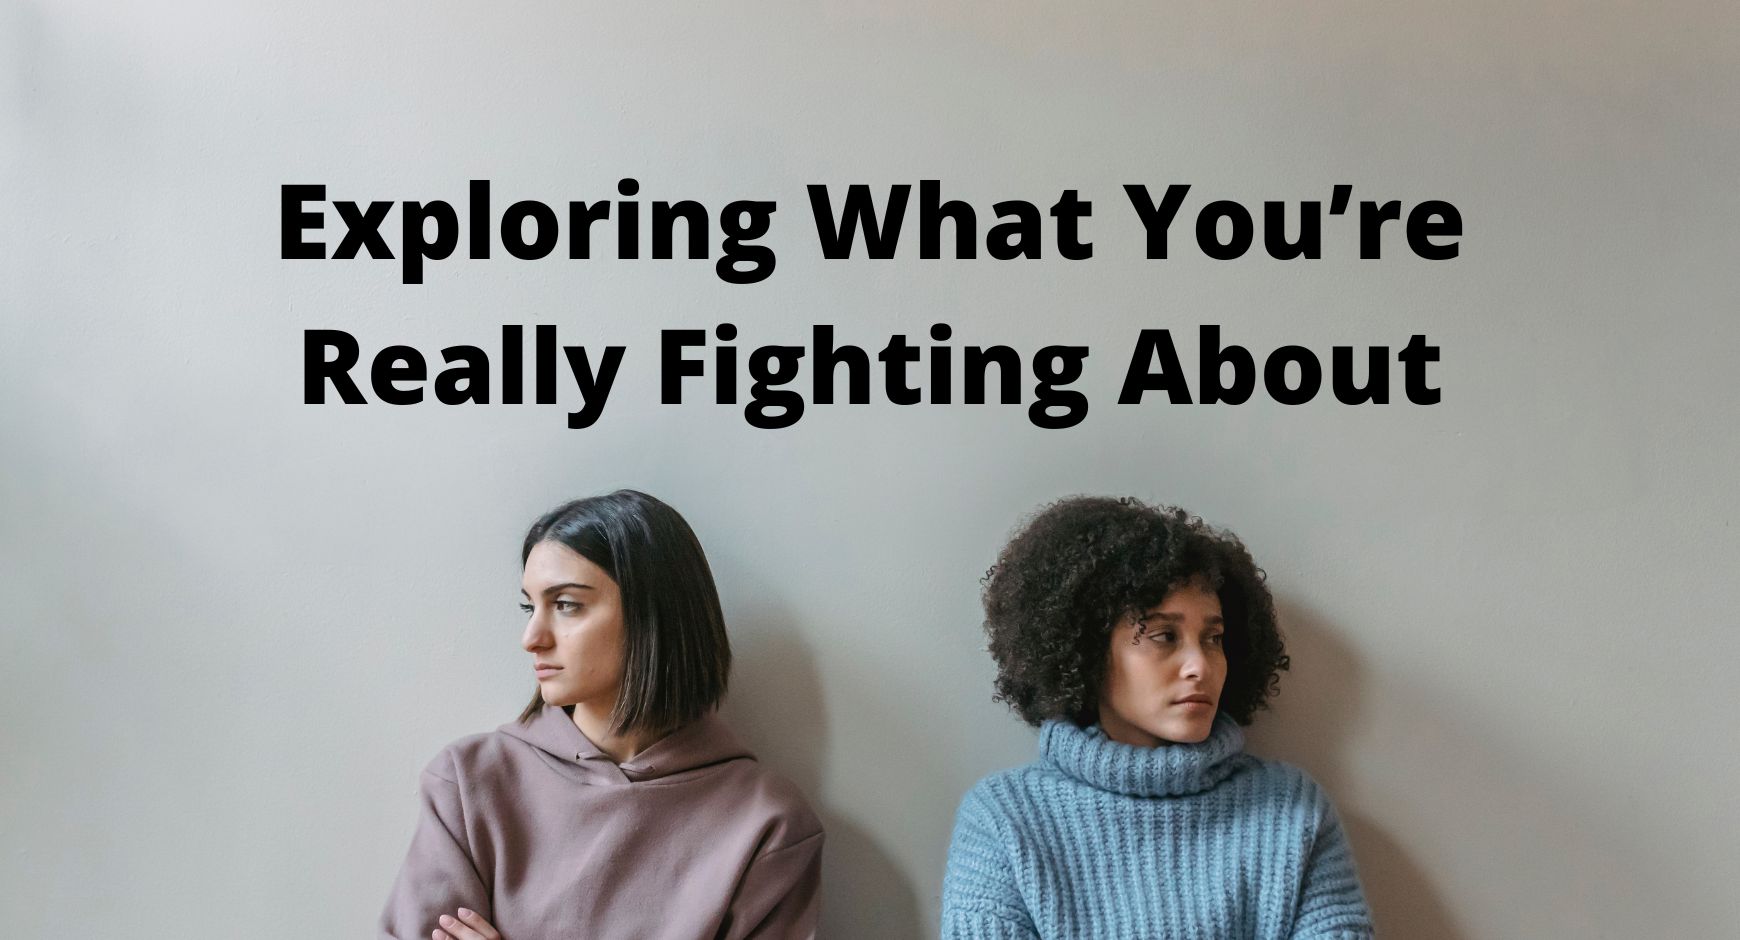 Two women siting next two each other looking unhappy next to words that read "Exploring What You’re Really Fighting About"